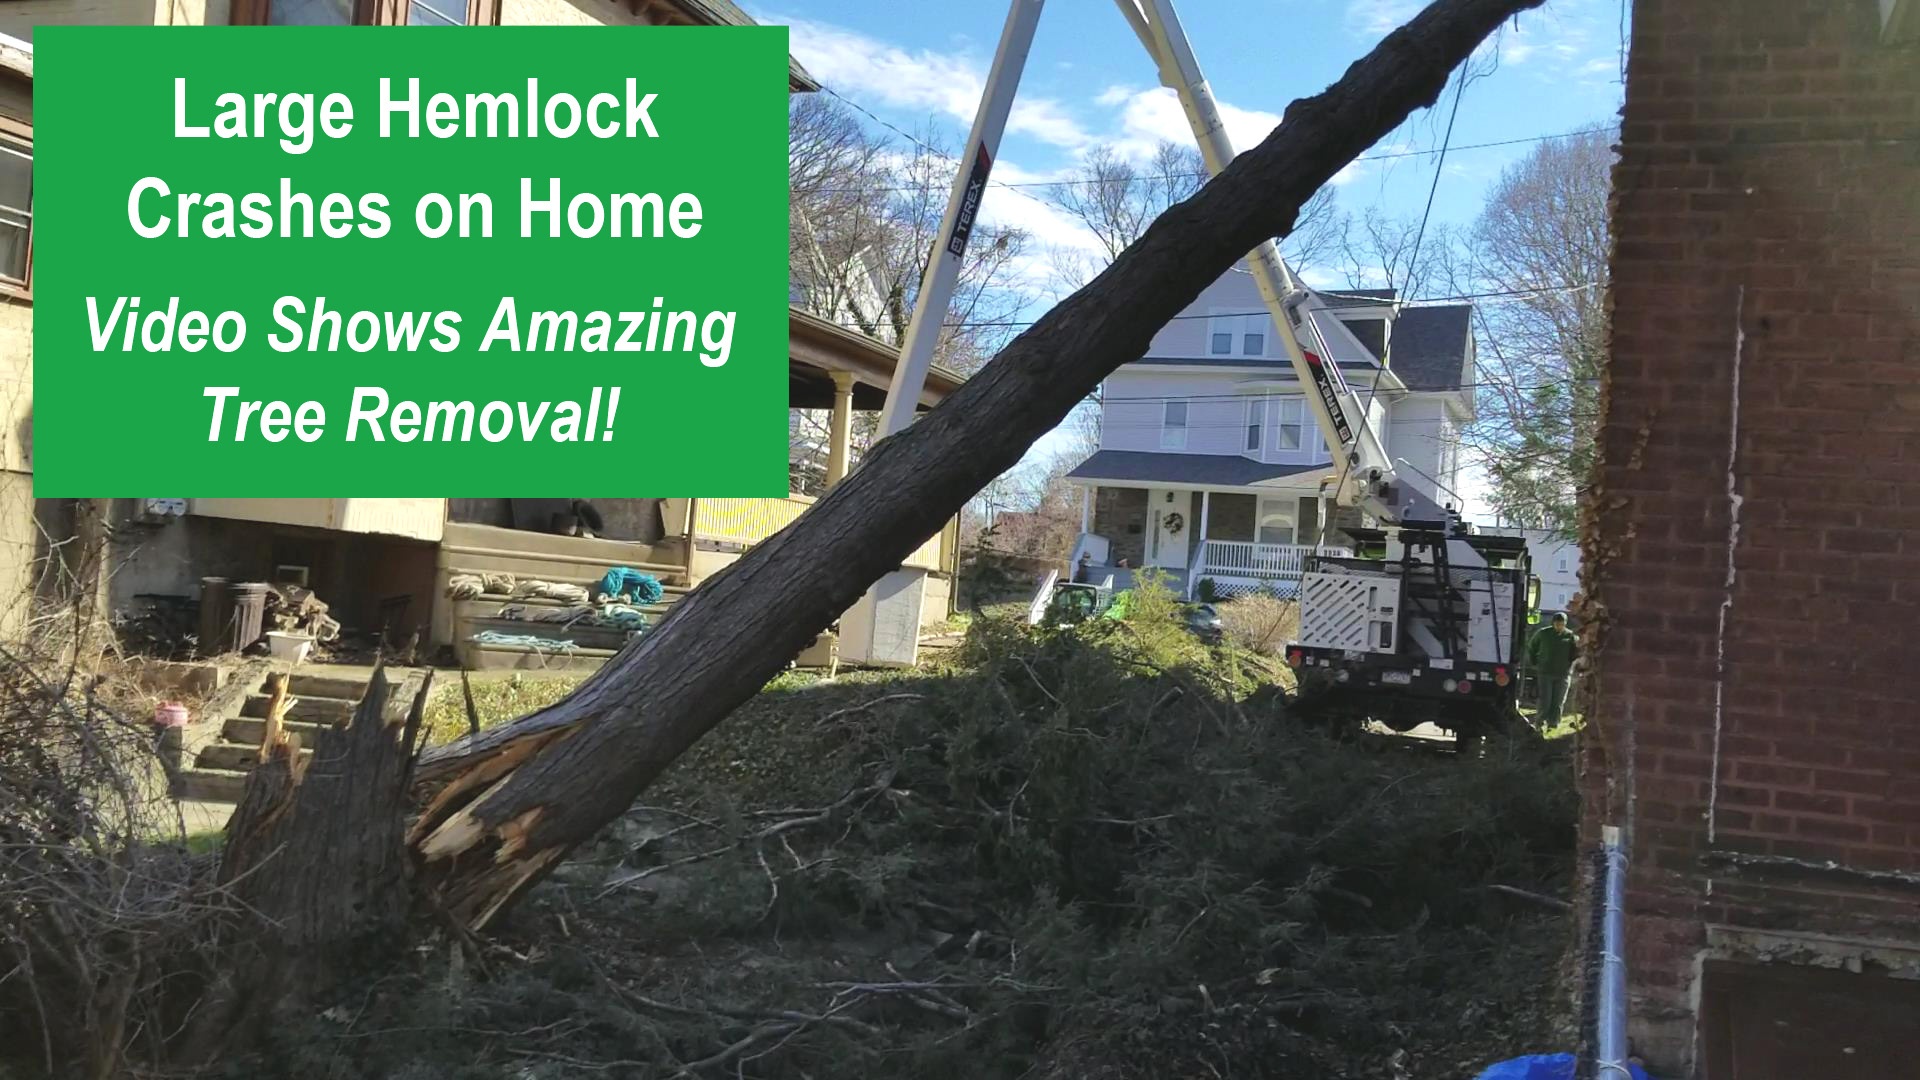 Large Hemlock Crashes Down on Home, Video Shows Amazing Tree Removal